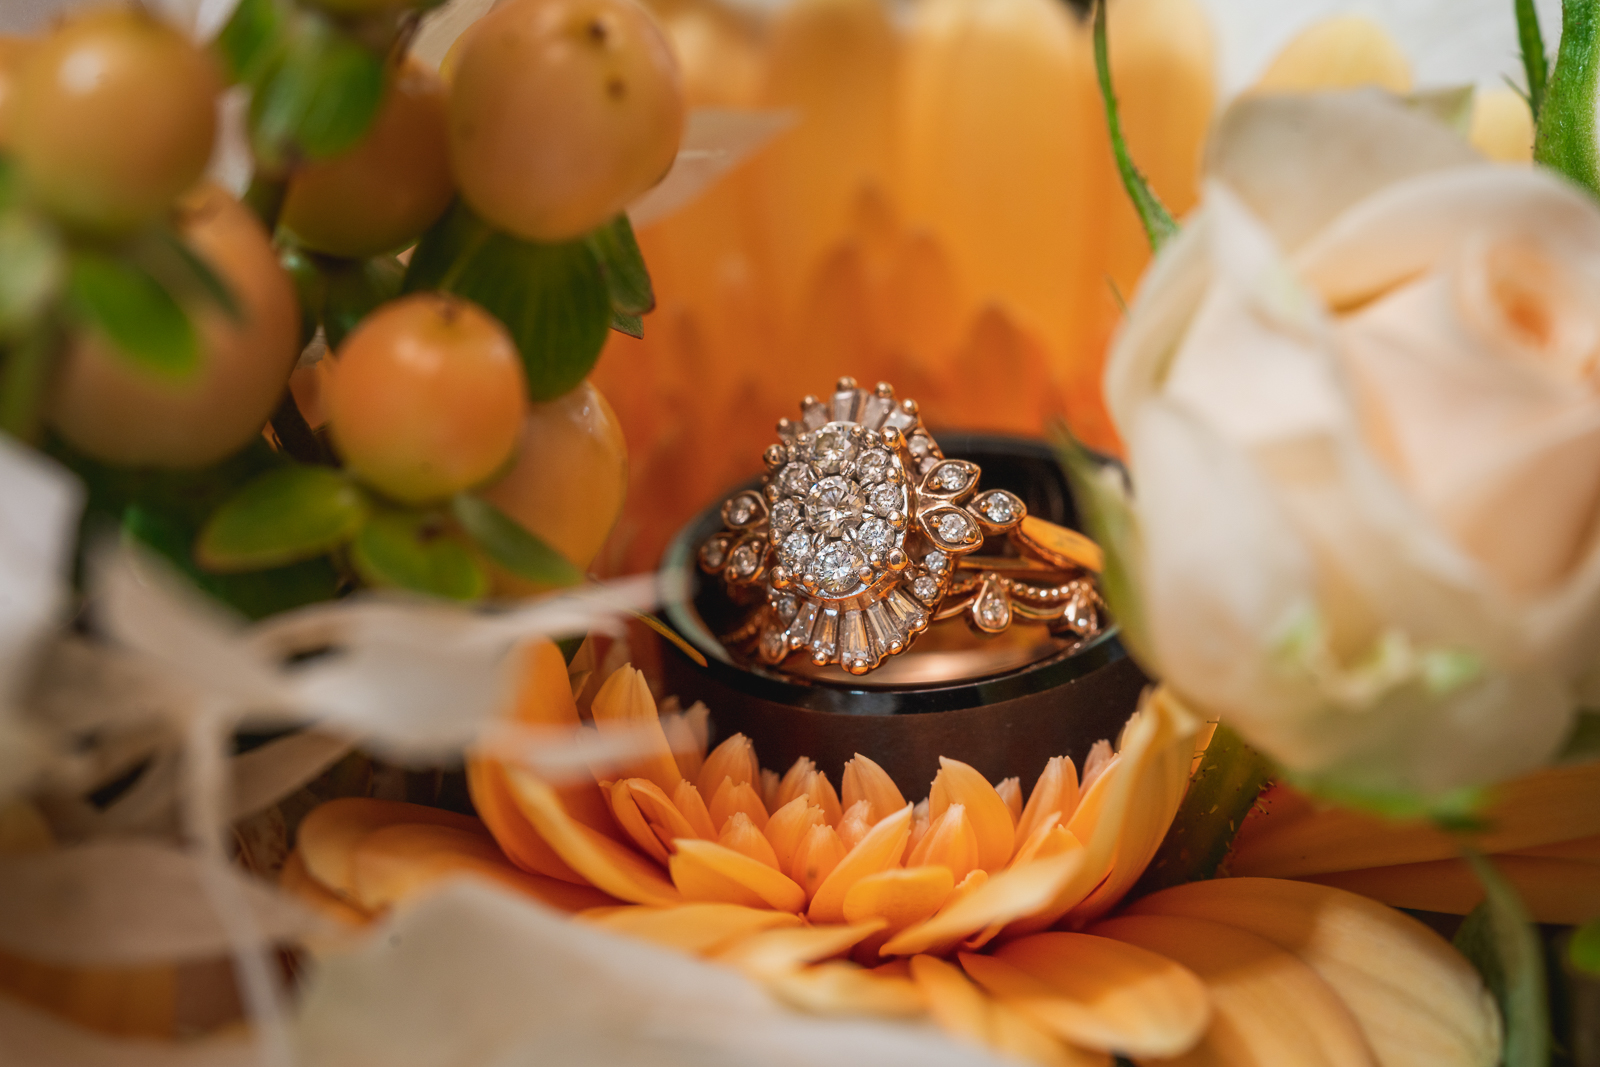 Wedding rings, engagement ring, wedding bands, diamond, beautiful engagement ring, flowers, orange, fall wedding, fall colors, rustic outdoor wedding ceremony at White Birch Barn